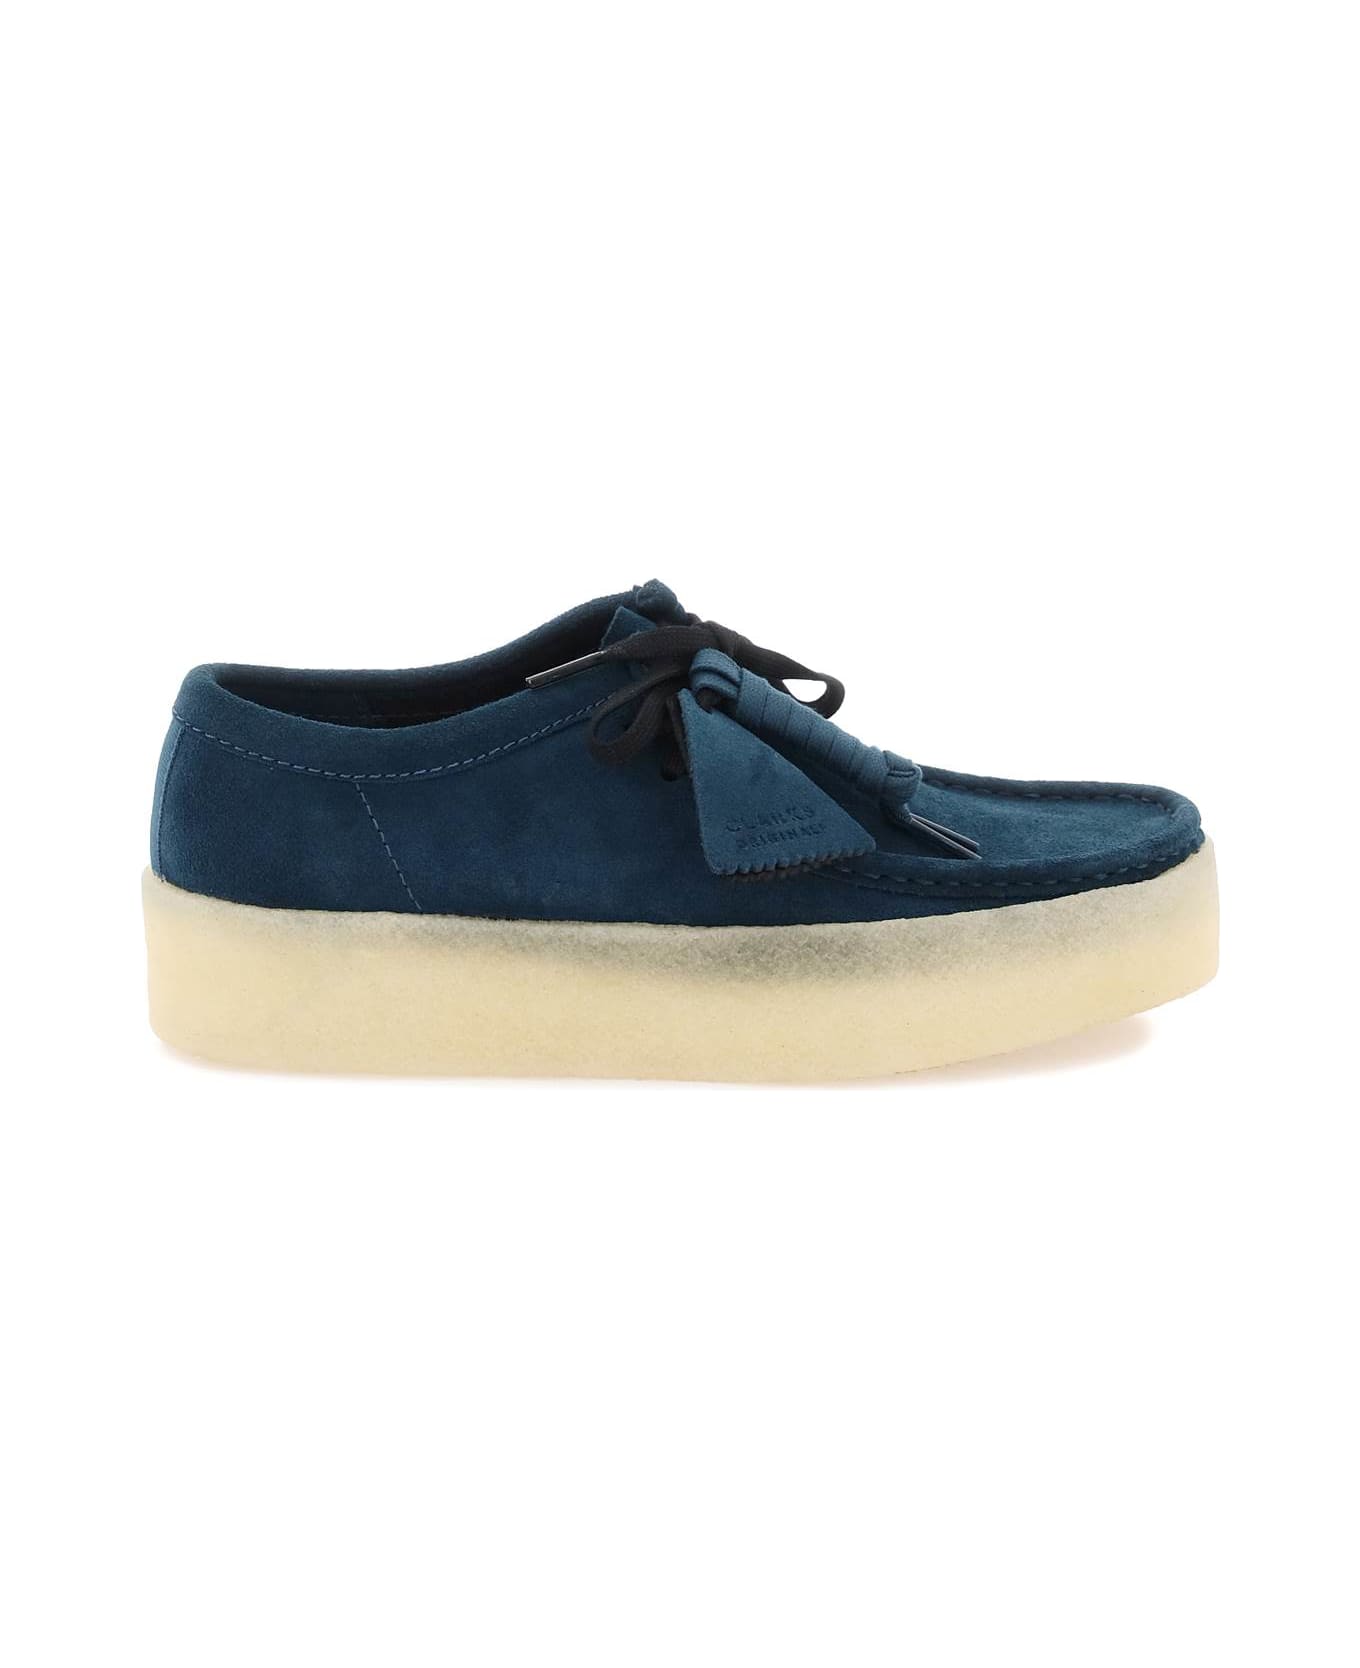 Clarks Wallabee Cup Lace-up Shoes - DEEP BLUE (Blue)